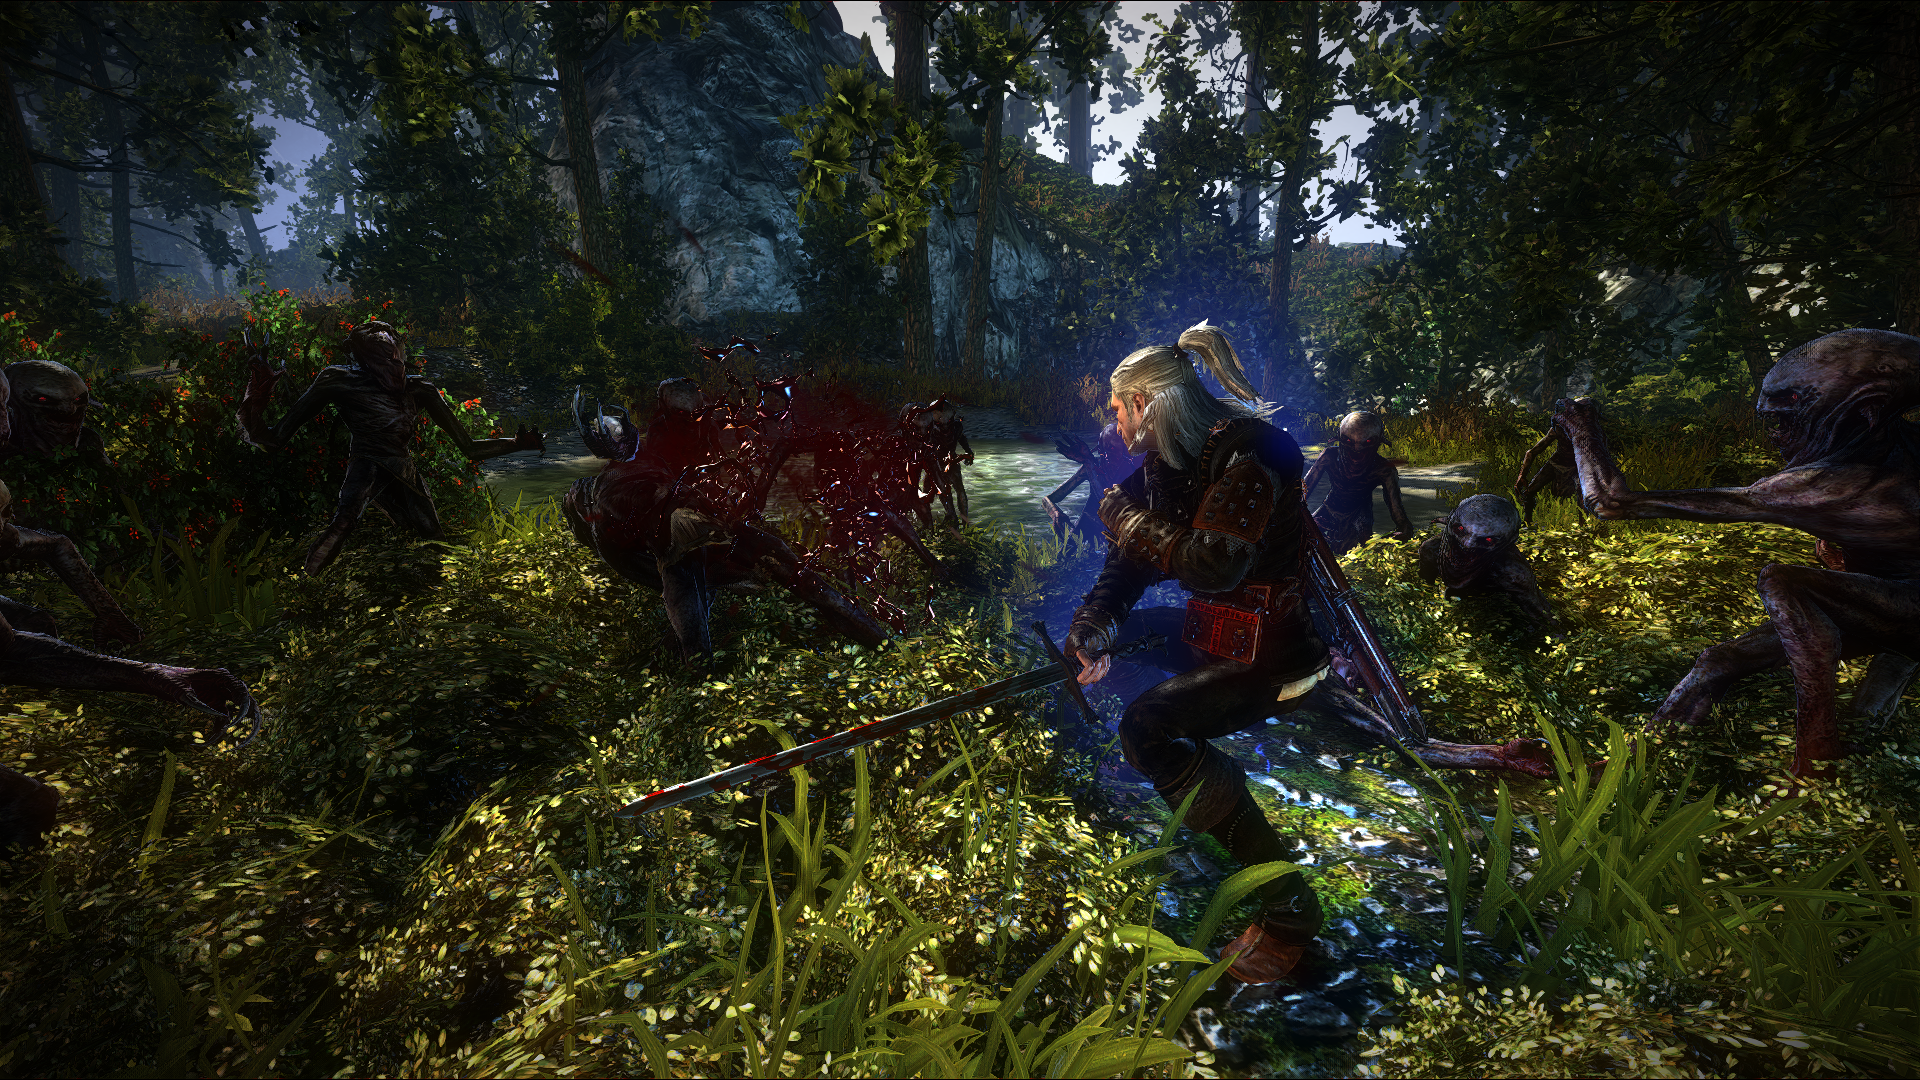 Video Game The Witcher 2 Assassins Of Kings 1920x1080